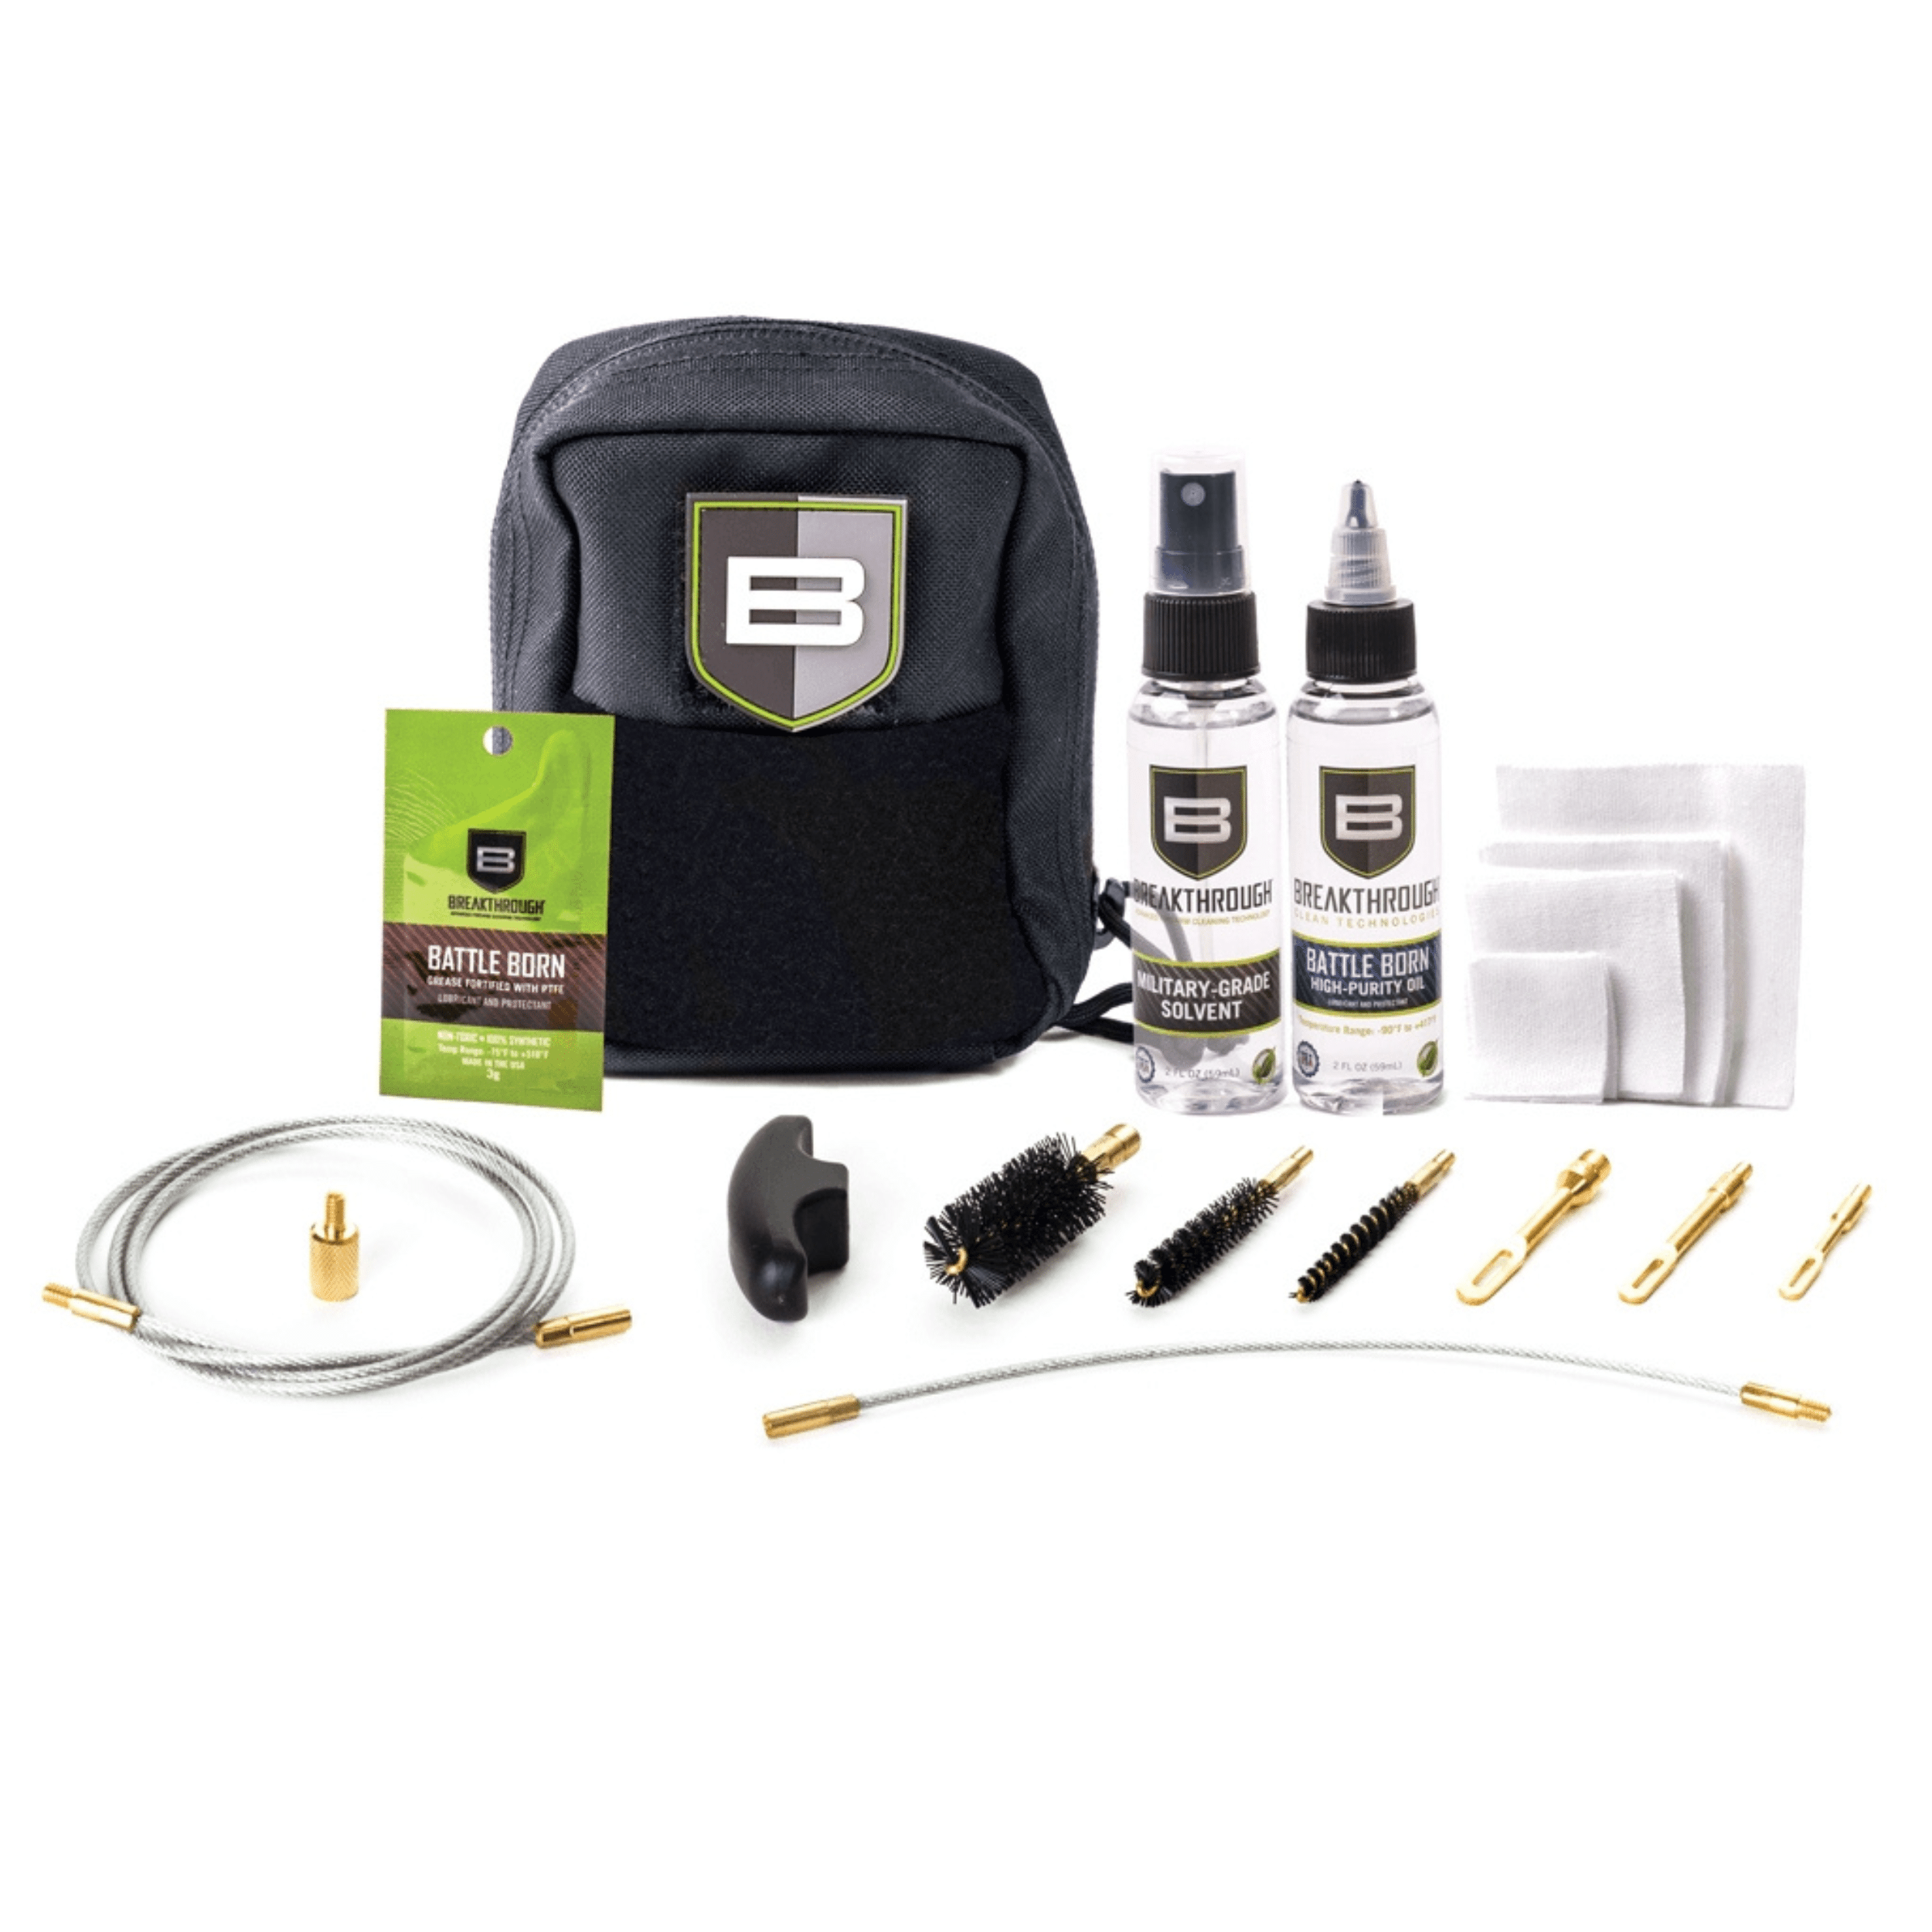 Breakthrough Clean weapon cleaning kit